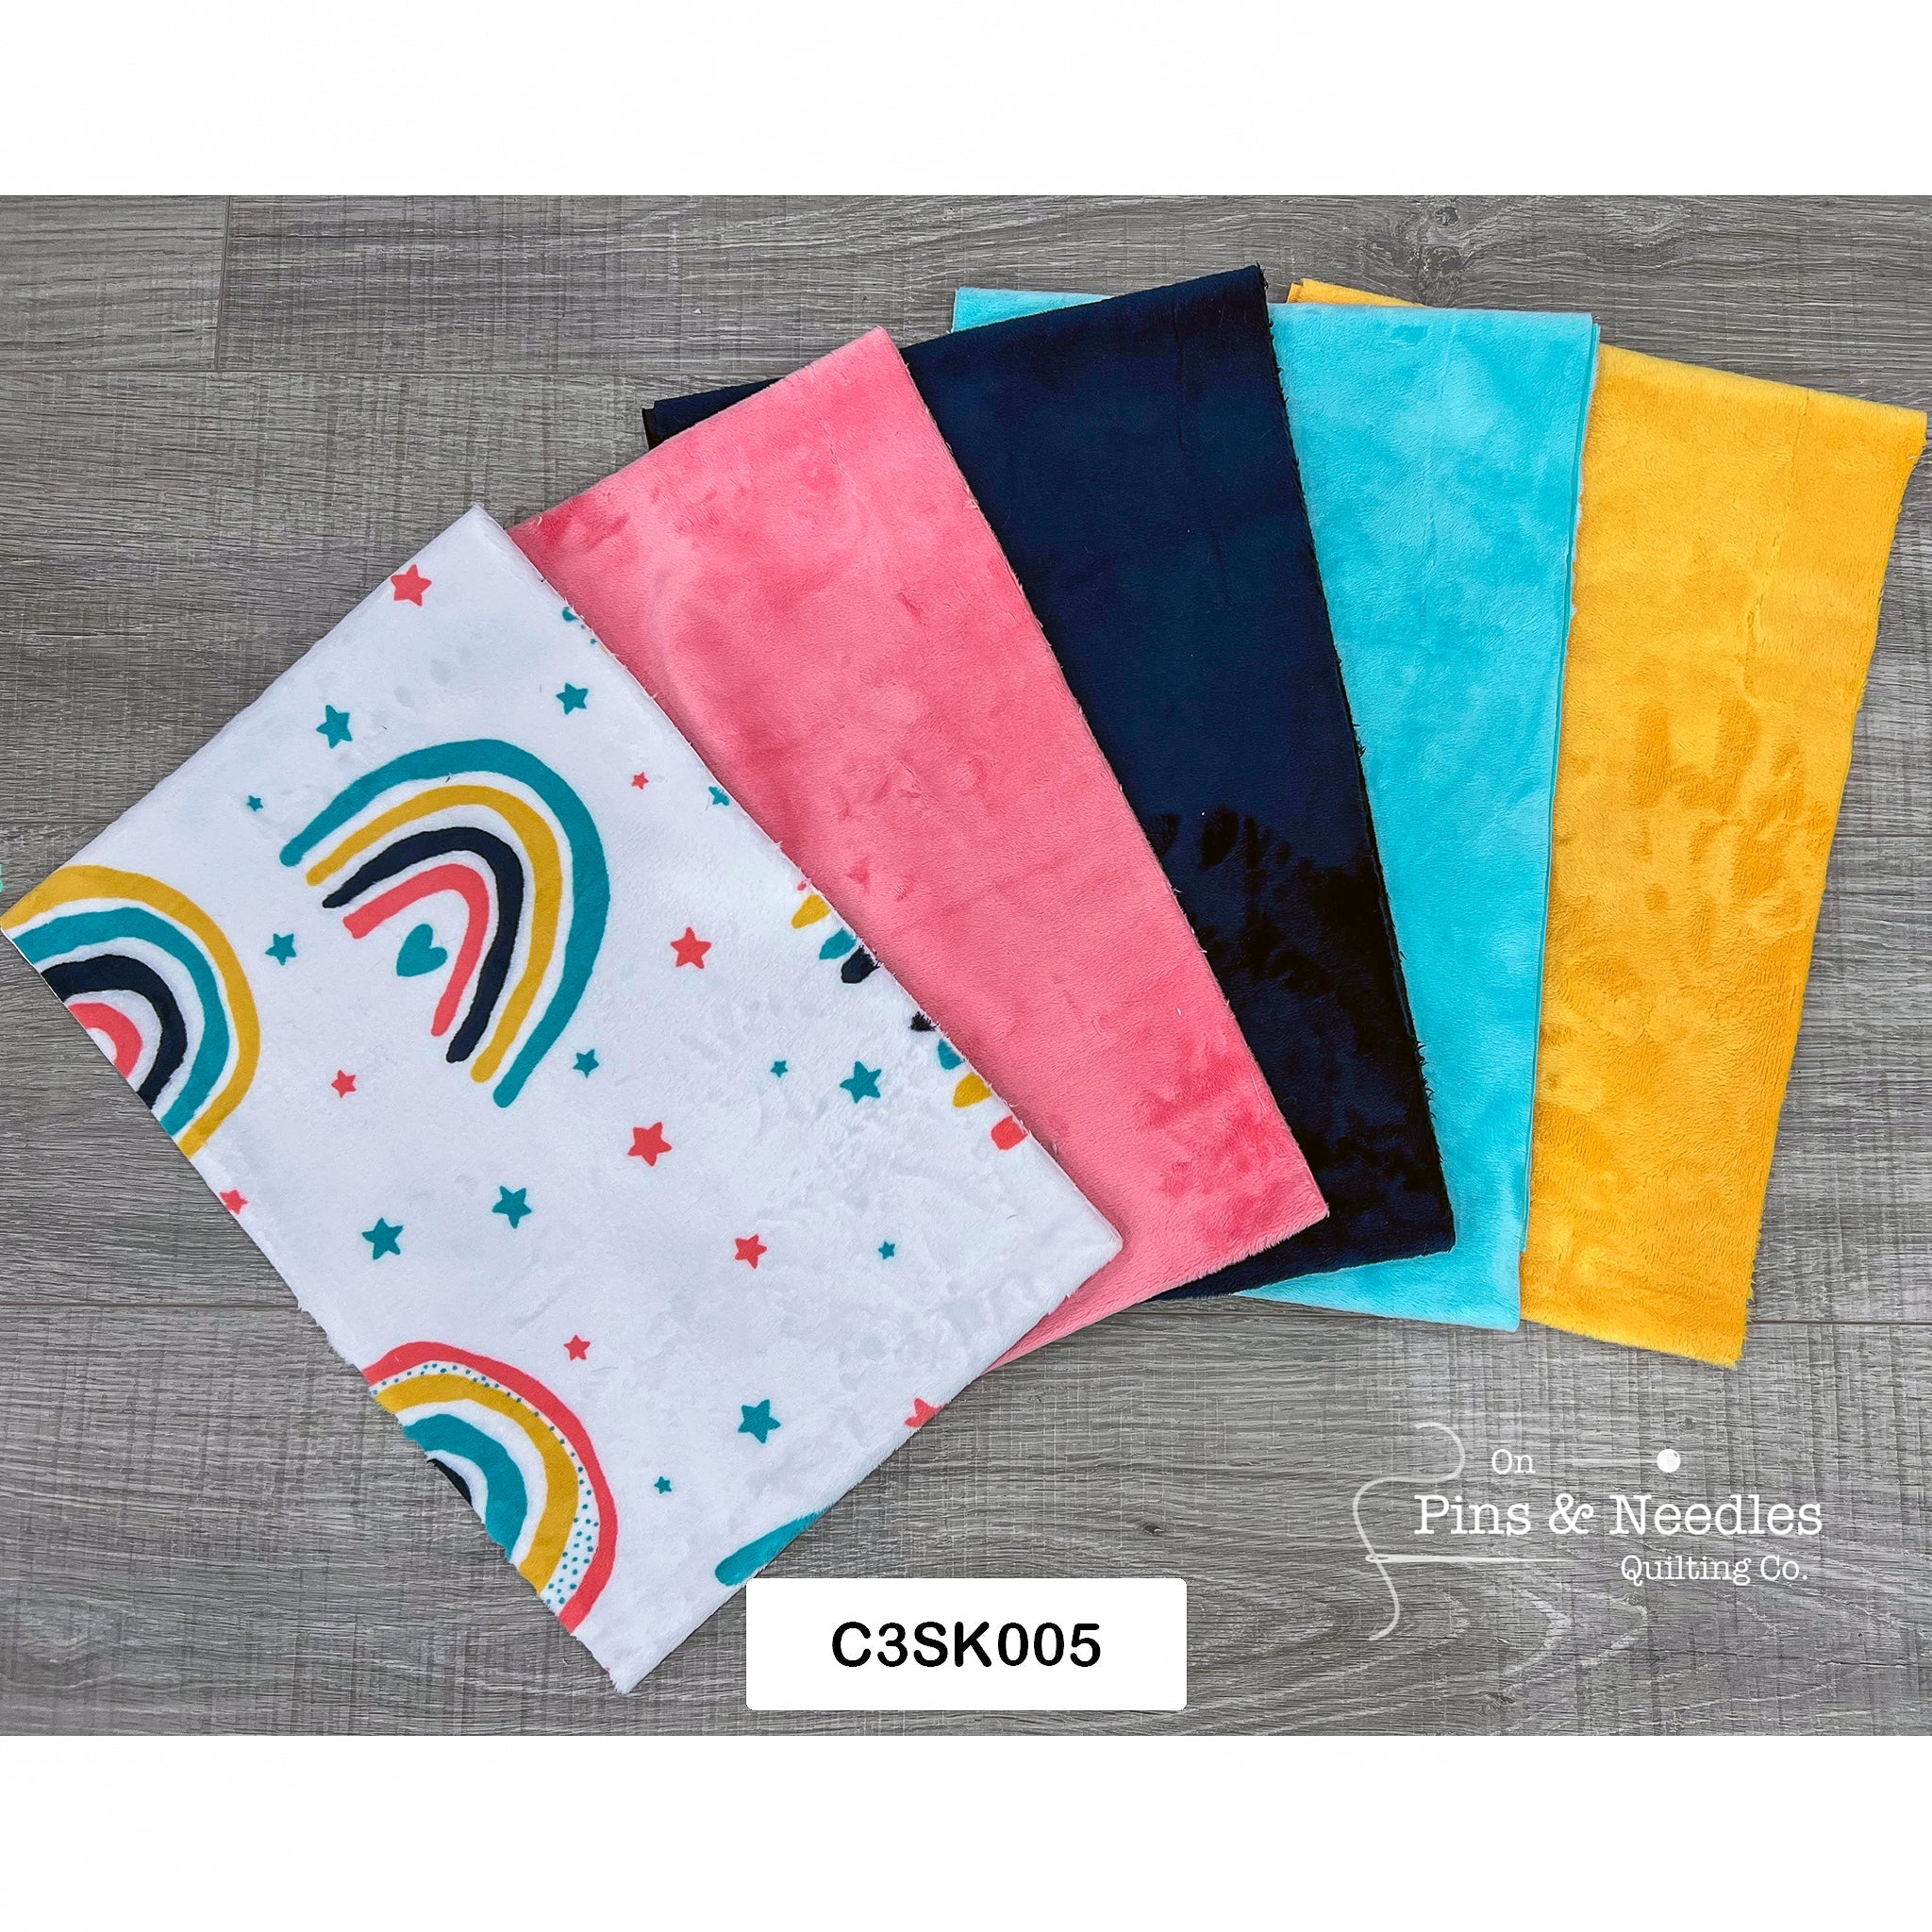 Limited Bundles 5 Pack of 10" x 60" Cuddle Strips - Shannon Fabrics - On Pins & Needles Quilting Co.